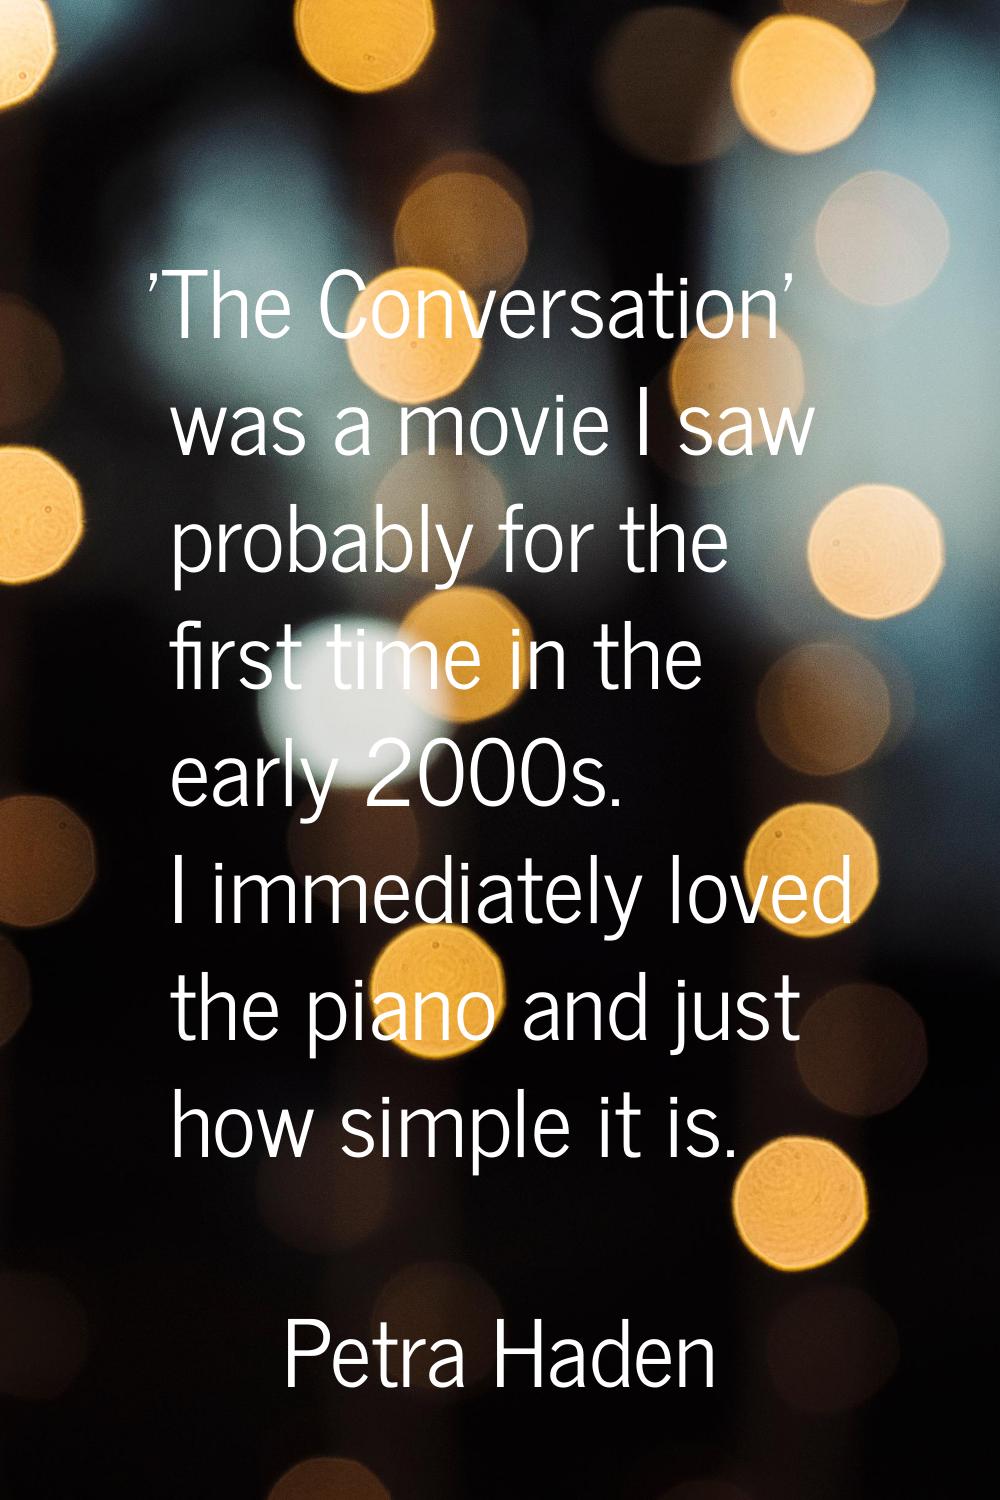 'The Conversation' was a movie I saw probably for the first time in the early 2000s. I immediately 